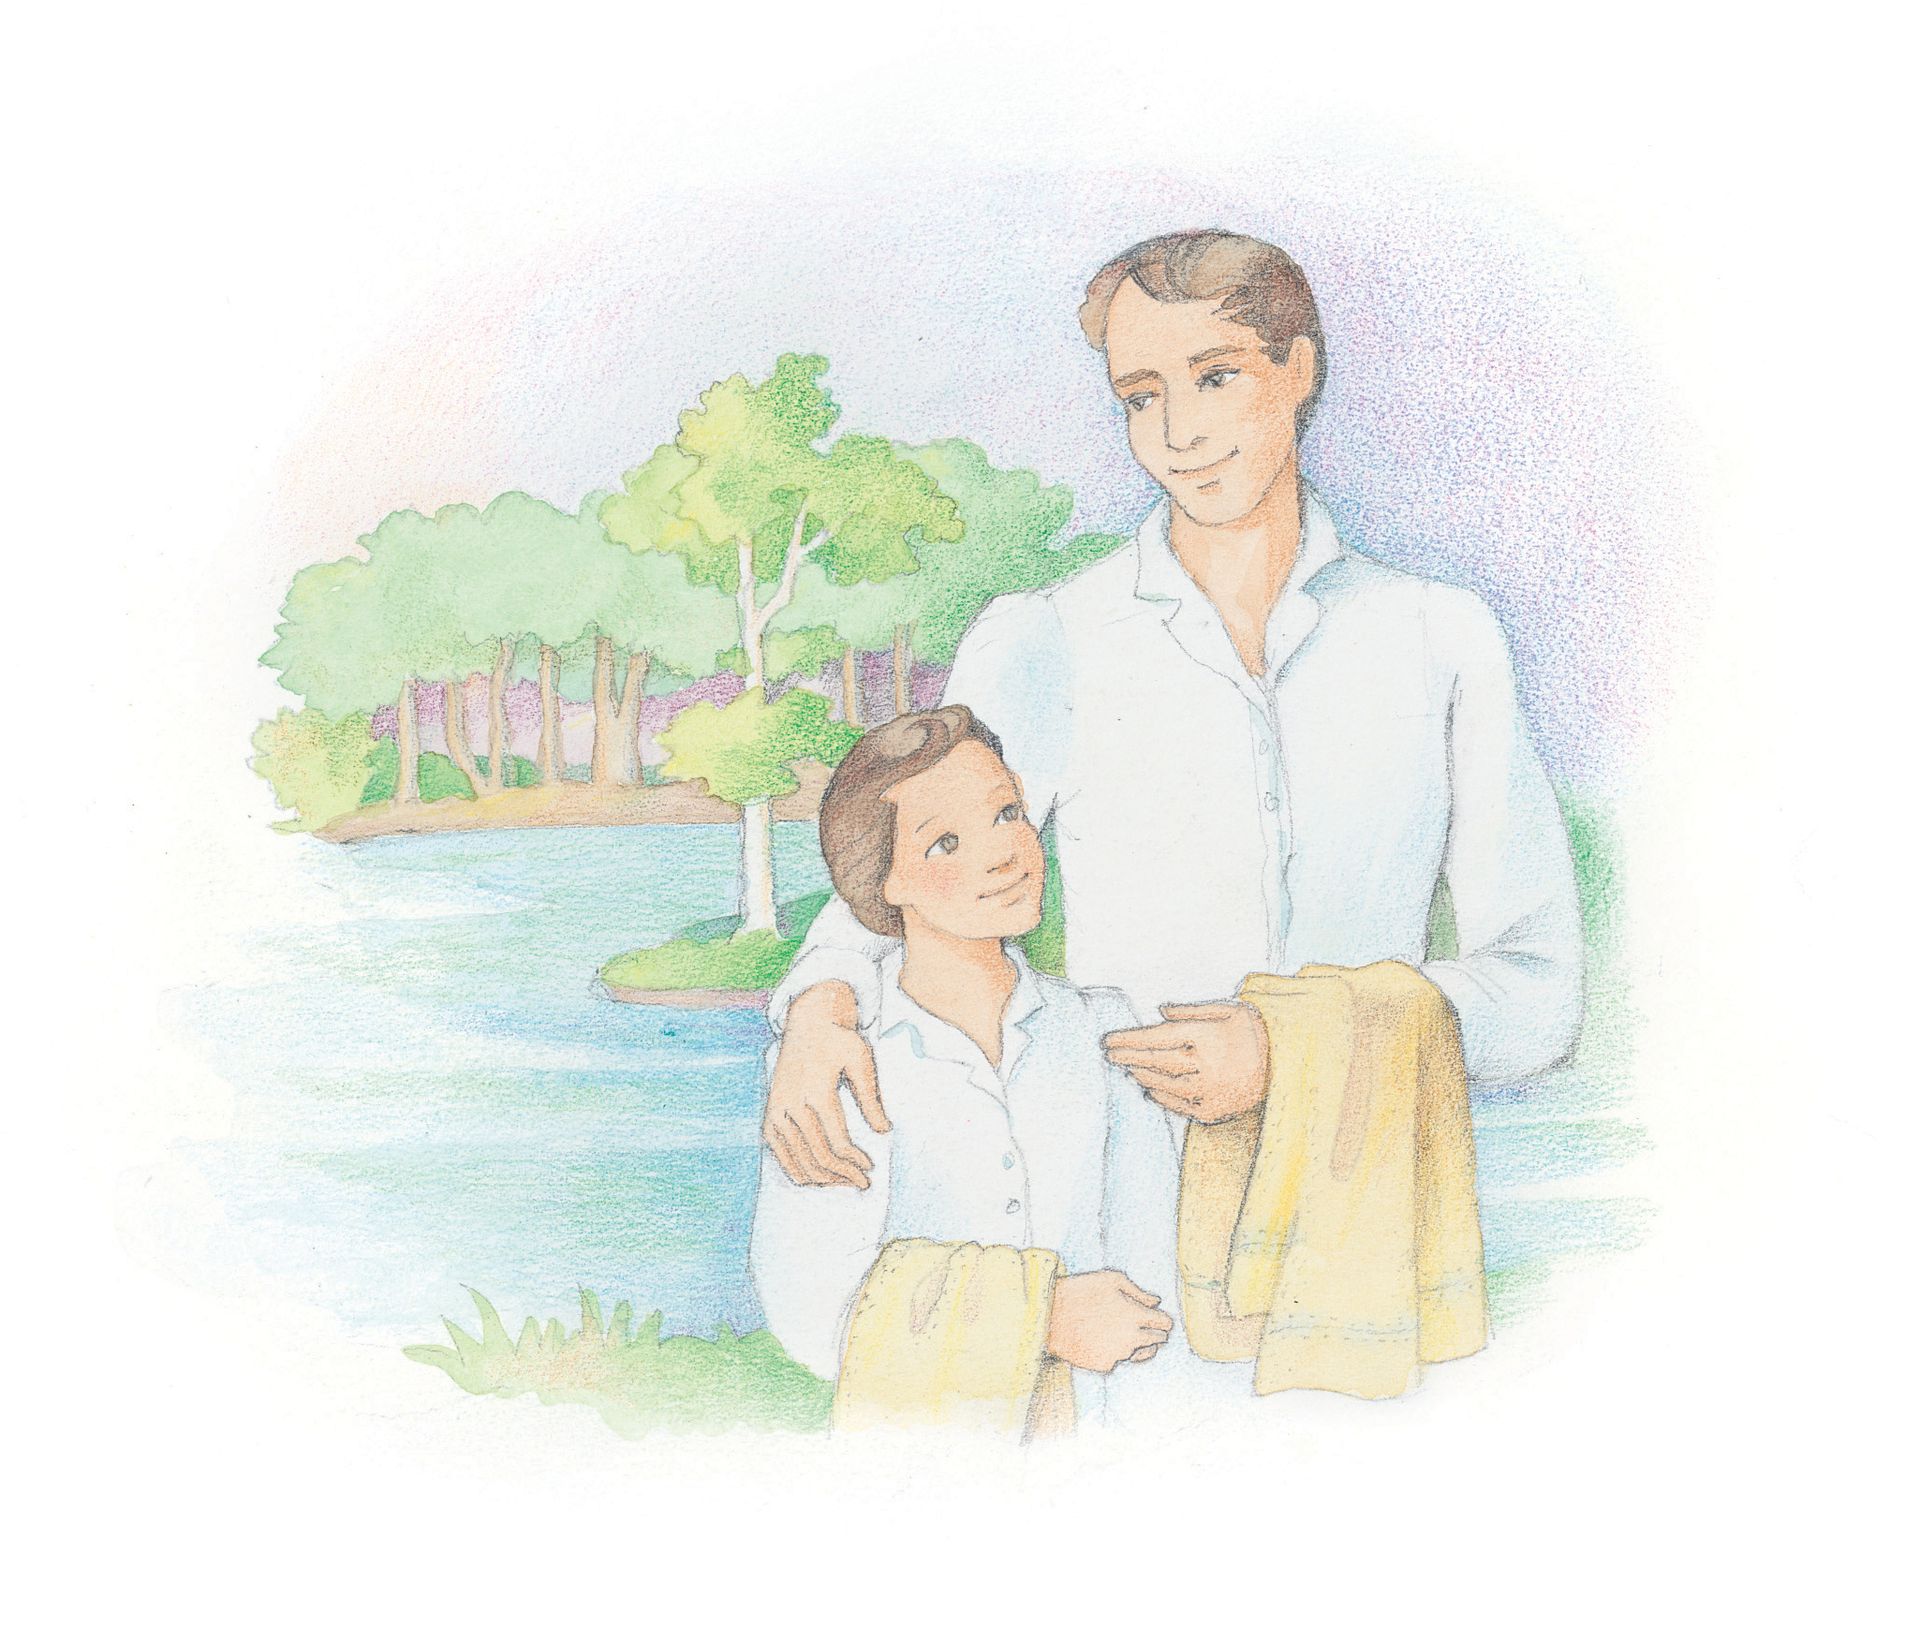 A boy standing with his father on his baptism day. From the Children’s Songbook, page 104, “I Like My Birthdays”; watercolor illustration by Phyllis Luch.